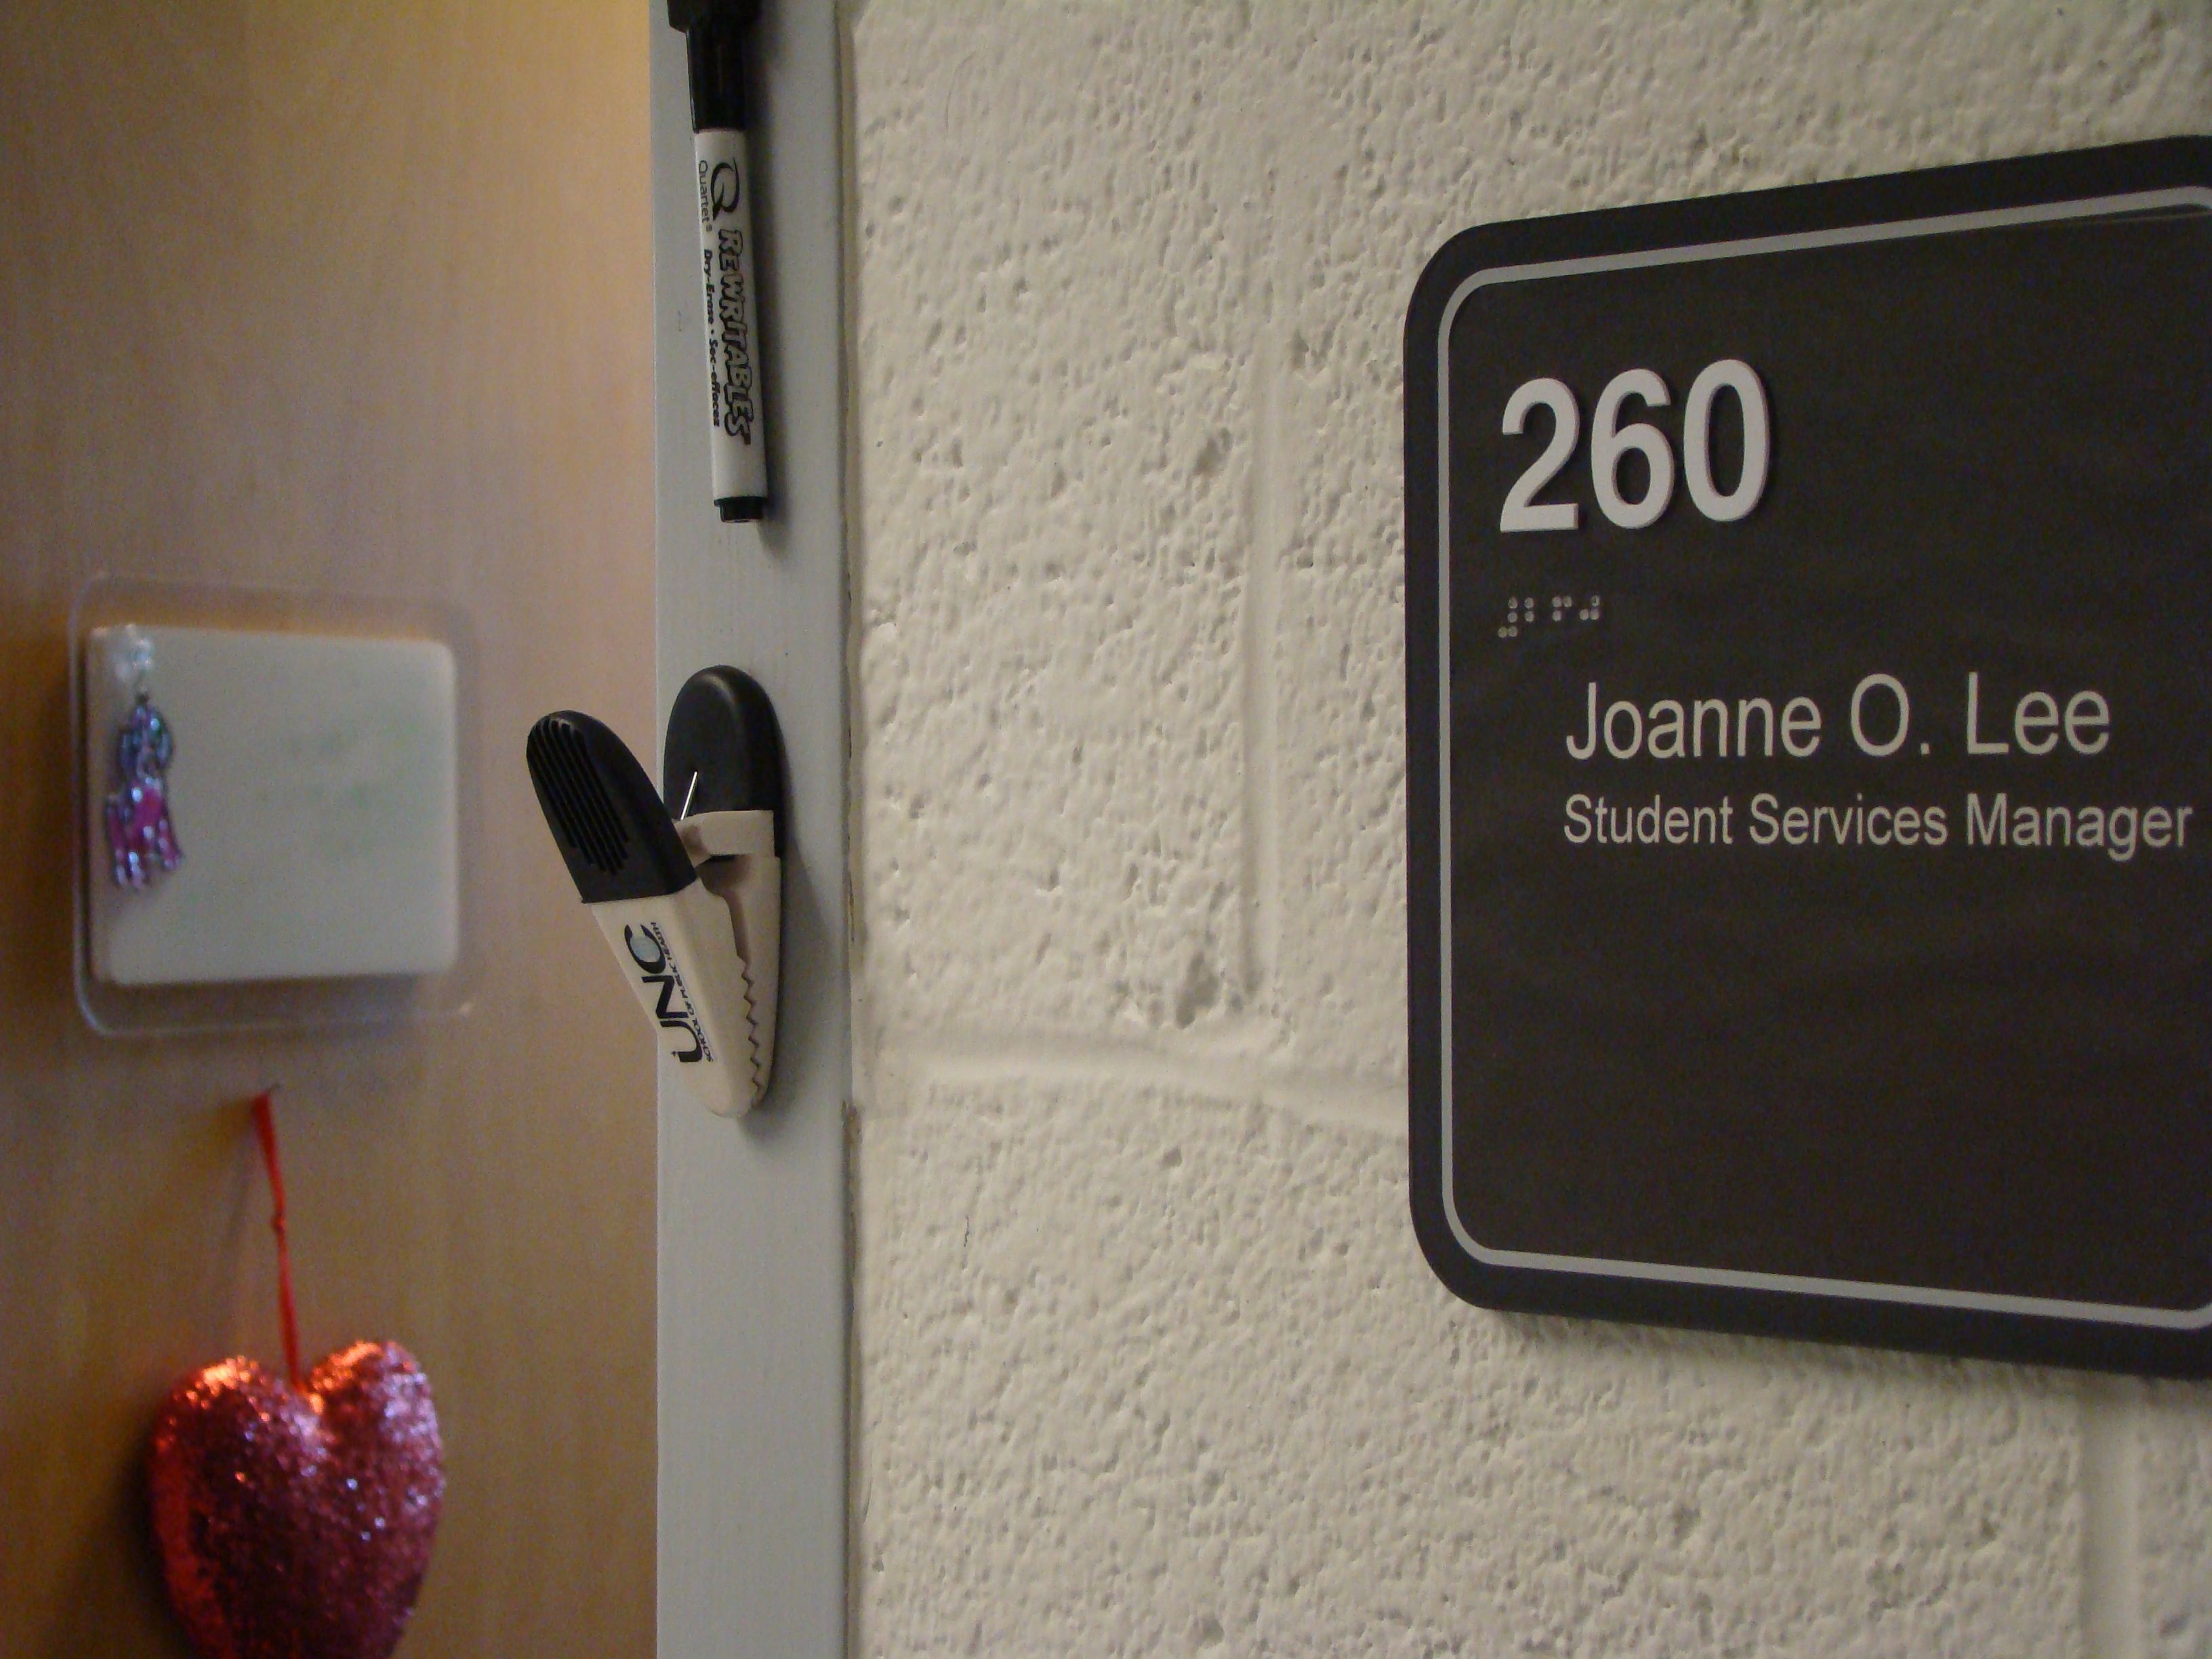 By leaving the door to her office open, Ms. Lee aims to let students know they are free to drop by.